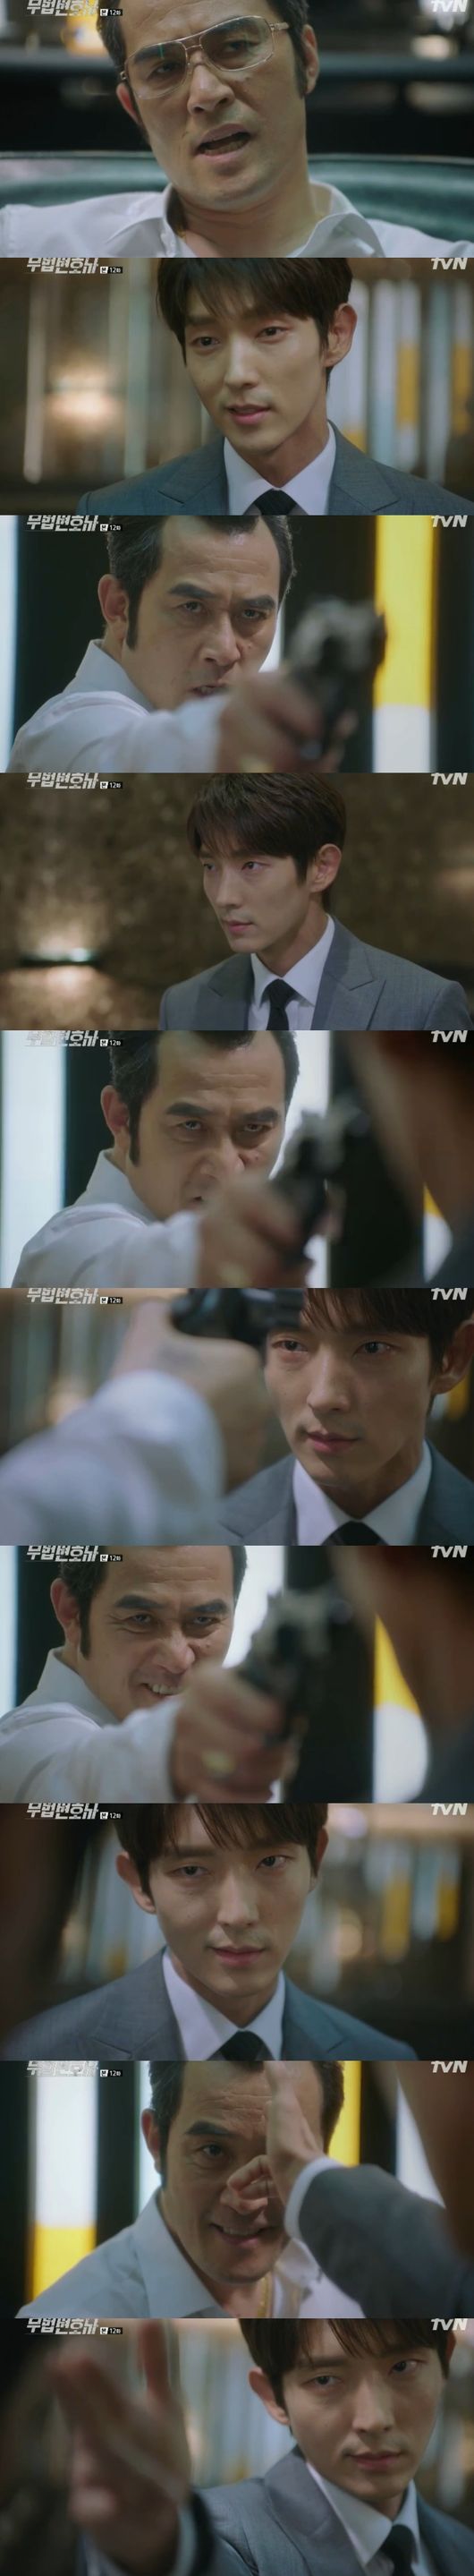 In The Outlaw Attorney, Lee Joon-gi found out that Lee Hye-Yeong had attracted him.In the TVN weekend drama Unlawful Lawyer (director Kim Jin-min, playwright Yoon Hyun-ho) broadcast on the 17th, I learned that the owner who sent the note by Lee Joon-gi was Cha Moon-sook (Lee Hye-Yeong).Sang-pil said that Hyun-joos words, which asked him to let him go, did not leave his head. Sang-pil said he would go to Hyun-joo and keep his words to break up with Jae-yi.Then, he said to Hyun-joo, Ill give you one thing. All the information about Cha Moon-sook and An-oh-joo was written.Hyunju sent it, but Hyunju was embarrassed that I did not send it, and Sangpil was also shocked by the situation where his expectation was missed.I was confused by the situation where I could not know who sent it.Soon, Sang-pil began to check it, thinking about where he was going to pick up. I will do it the way I used to.I will do the same as my uncle was hit, he said, marking the start of revenge for Seokgwan-dong (invited by Dae-hoon).He kidnapped Seokgwan-dong and asked Choi For Heroes what he did to Choi, saying, I will pay back what I did to my uncle.Seokgwan-dong said, I stabbed you with a knife, but I did not do it, but I did not do it. What you did today will do the same.Seokgwan-dong said, Everyone has told me to do it. He said, I want revenge on An-oh. Sang-pil said, An-oh will revenge you for me.Phil came to An-o-ju, and he looked at An-o-ju and Nam Soon-ja with interest, and Cha Moon-sook provoked them to know if they knew.I do not know if Seokgwan-dong is curious, he said. I will know through the news tomorrow morning.So, An-oh, who is hot, pointed a gun at the head of the pencil and warned, If you go around with your head, you will put a bullet in it.Sang-pil obtained the evidence from his cell phone that recorded all the words of An-oh-ju: to solve them first on the Internet for the note owner confirmation process, a matter to be dealt with before he put An-oh-ju in court.Sang-pil looked at the note carefully.Sang-pil visited Chun Seung-beom (Park Ho-san) and said, This is all my questions solved. He found out that the person who sent the note to him was none other than Cha Moon-sook.Cha Moon-sook brought himself in, and he was watching The Big Picture and telling the note to Sang-pil from the beginning.He found out that he had Lee Yong to remove the aquariums who knew Chibu.I tried to remove the Bong Sang Pil by Lee Yong, who made me come to the ready and tried to Lee Yong with my knife.Especially, Lee Yong was the revenge of the epitaph to remove the anoju.I knew the desire of a person and it was Lee Yong-suk, said Sang-pil. But I chose me even though I knew that the end of my revenge was myself.